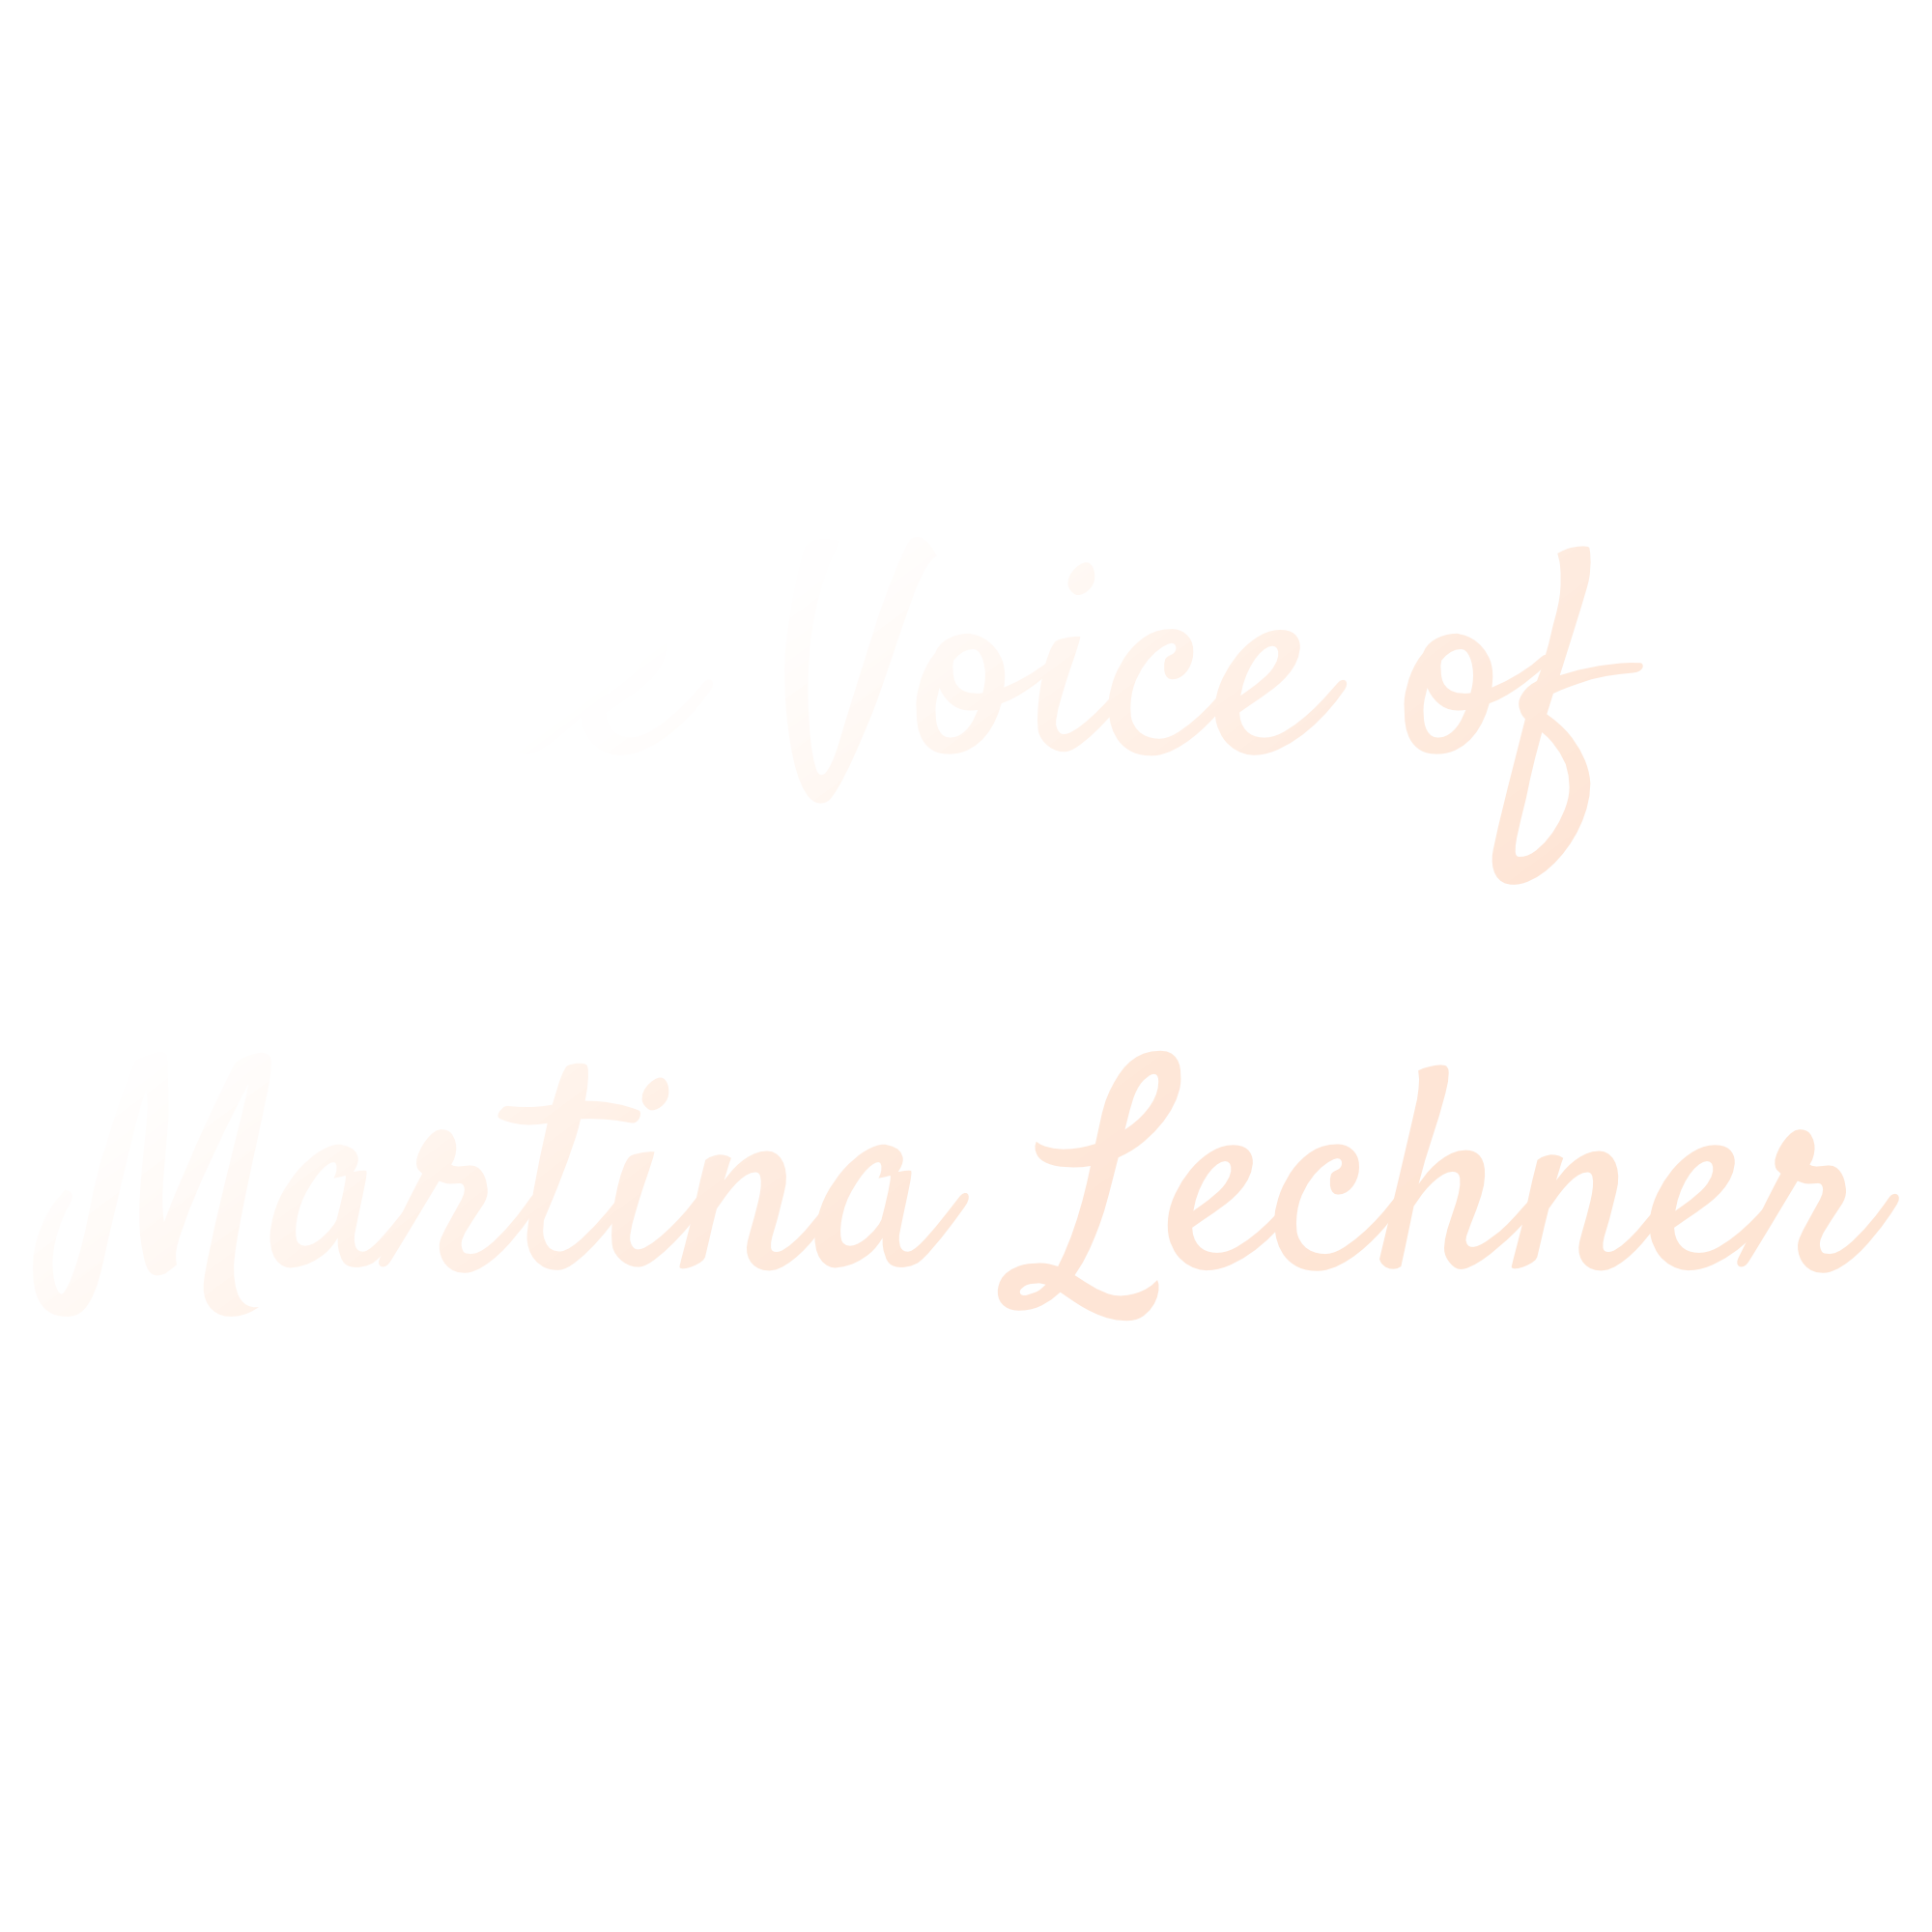 The Voice of Martina Lechner